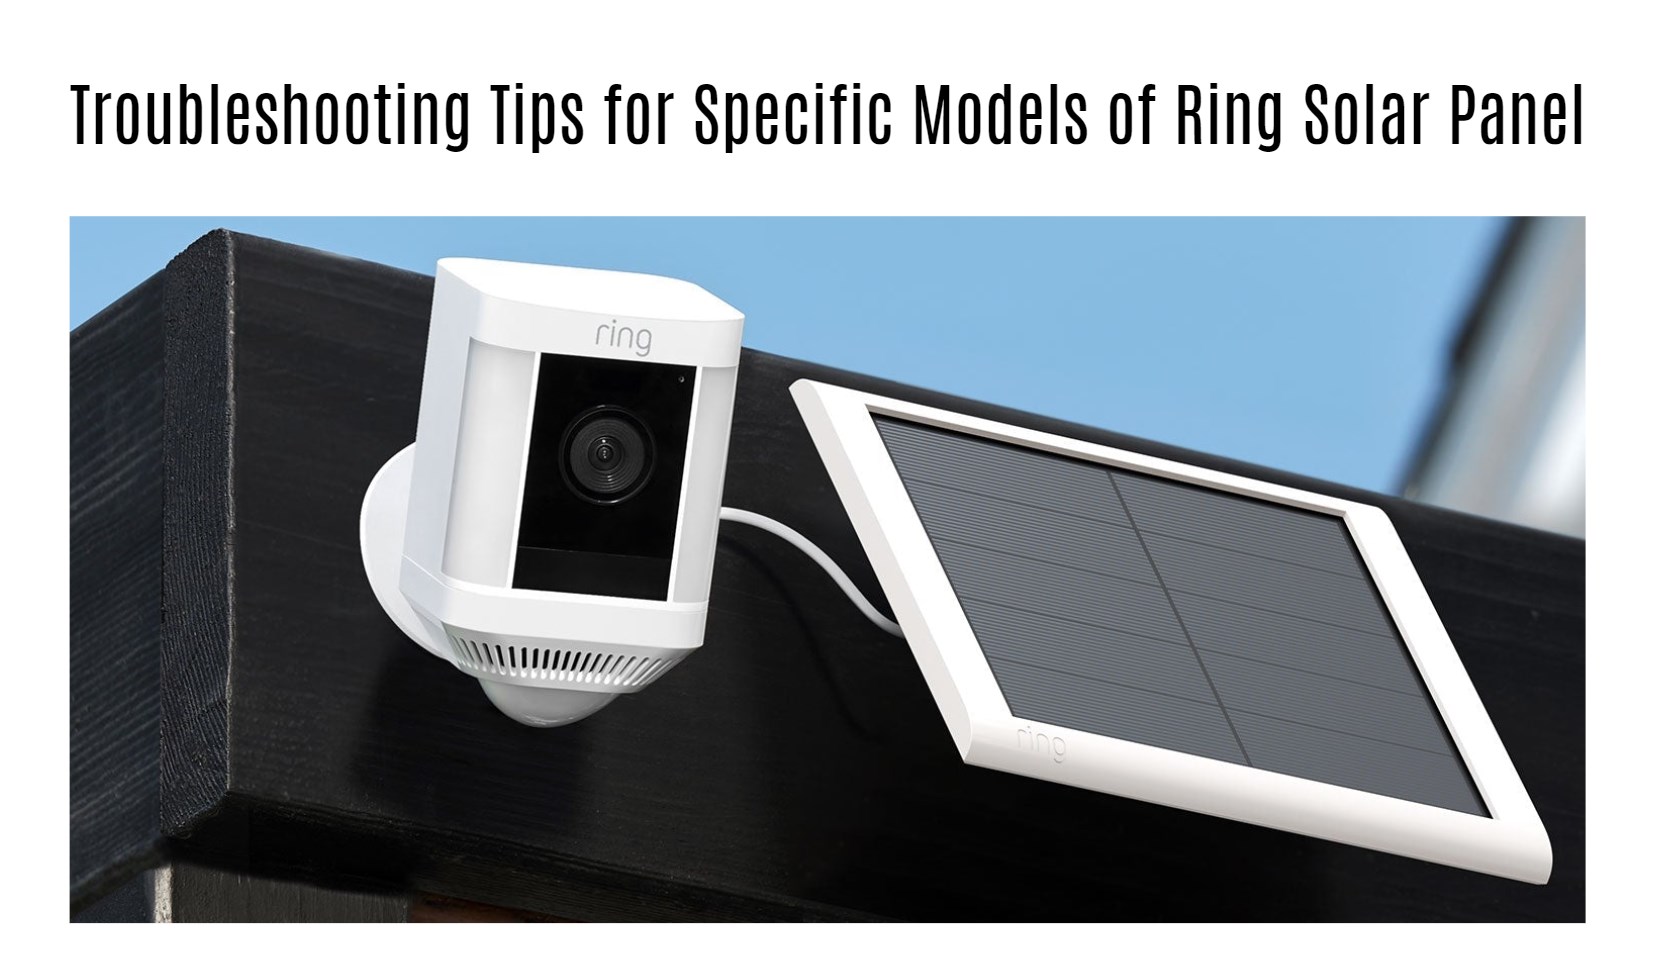 Troubleshooting Tips for Specific Models of Ring Solar Panel